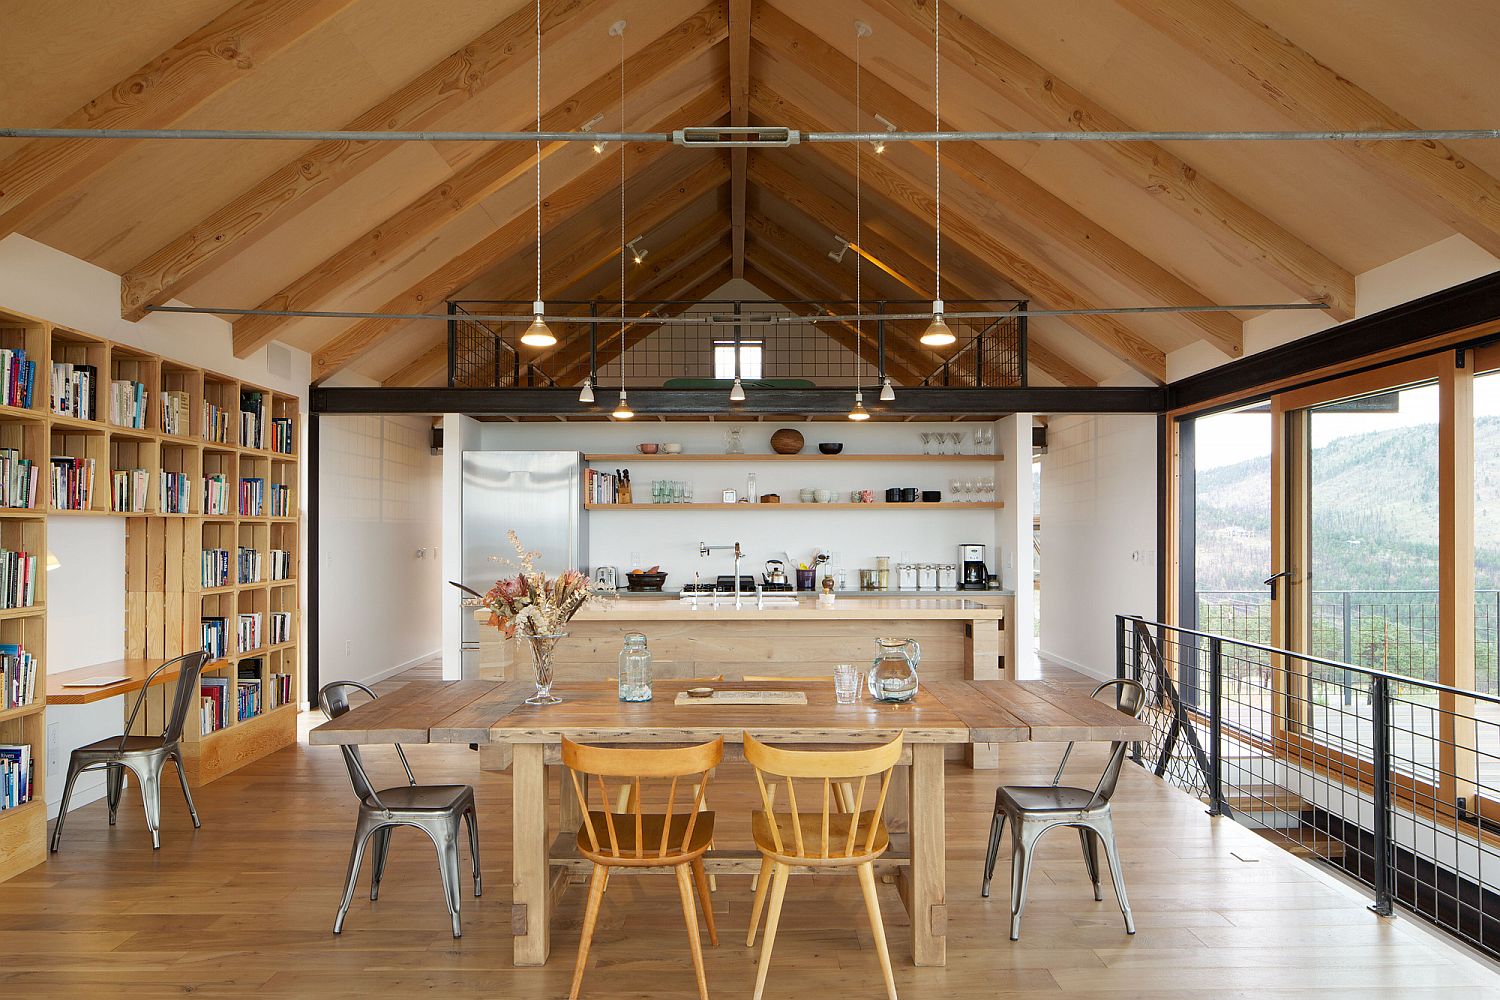 Gabled roof gives the top level living space an open and airy appeal